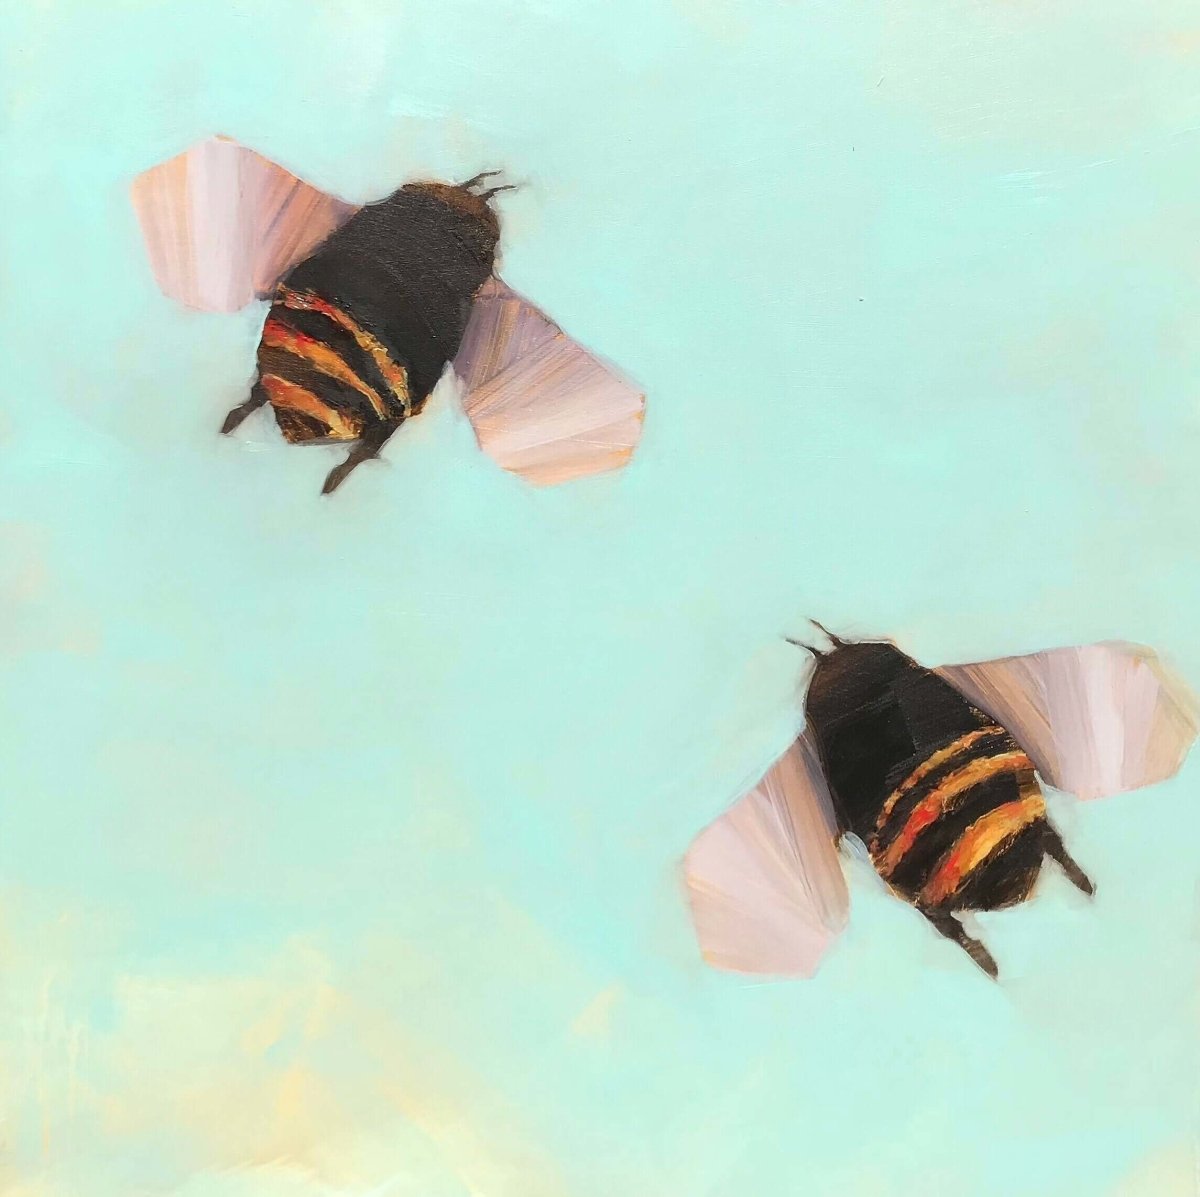 Bees 2-32 by Angie Renfro at LePrince Galleries